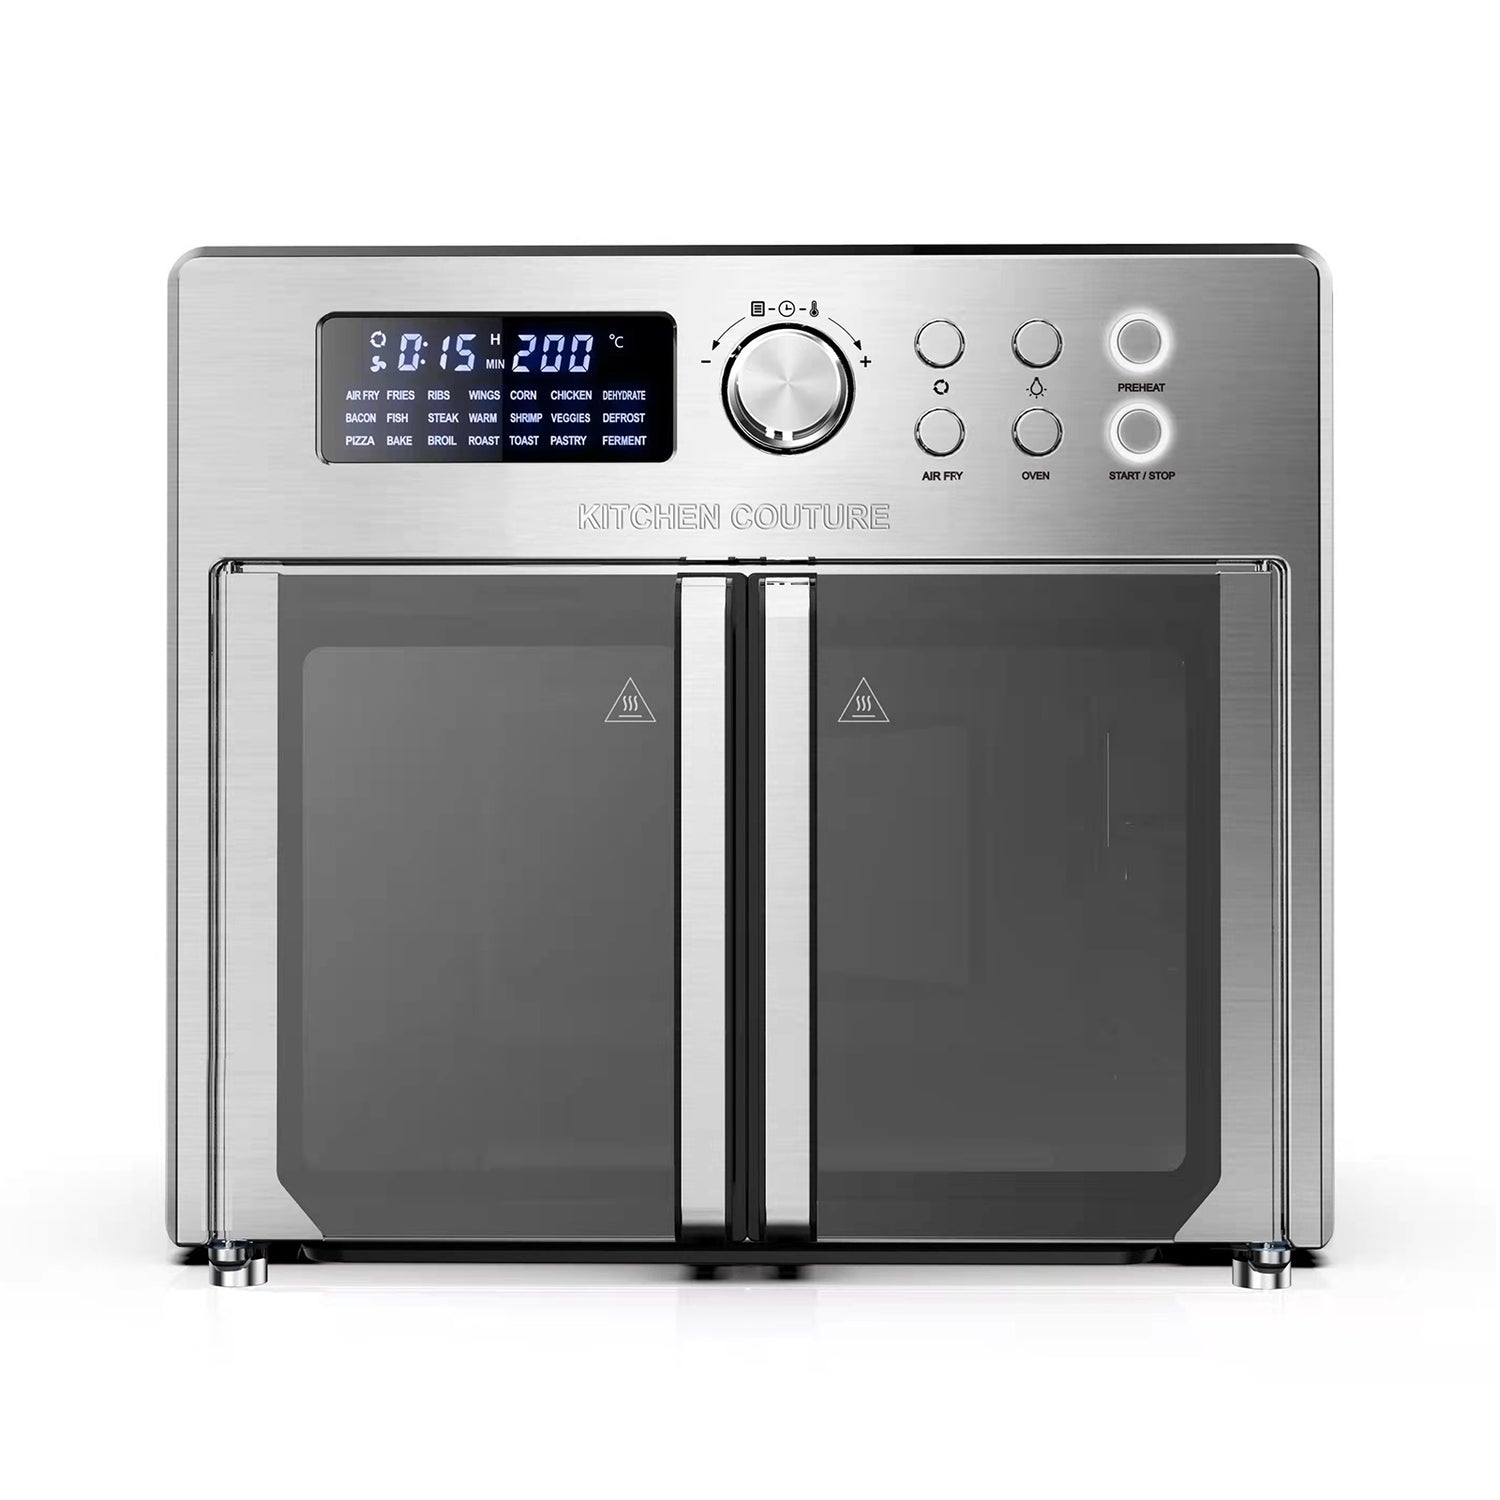 Kitchen Couture 25 Litre Air Fryer Oven French Door Stainless Steel 22 Presets-Small Kitchen Appliances-PEROZ Accessories